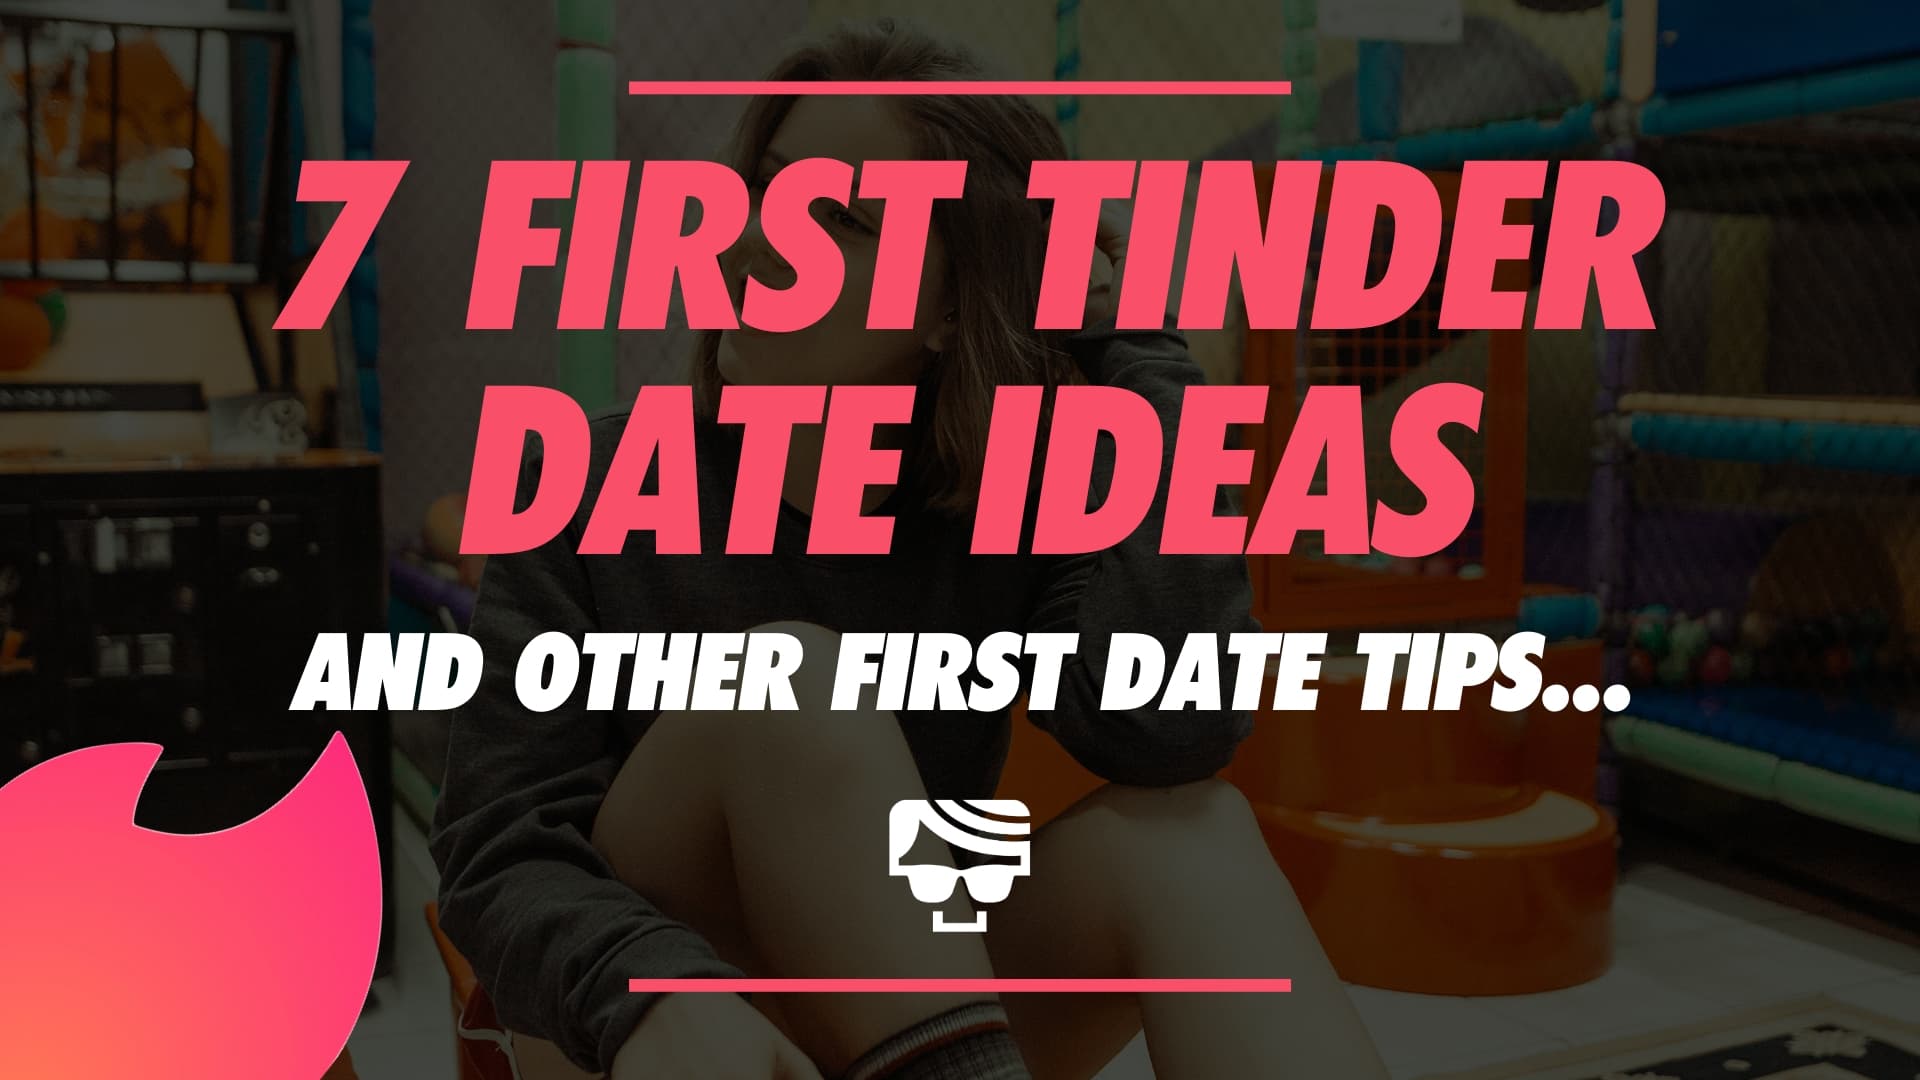 13 of the Best Online Dating Apps to Find Relationships